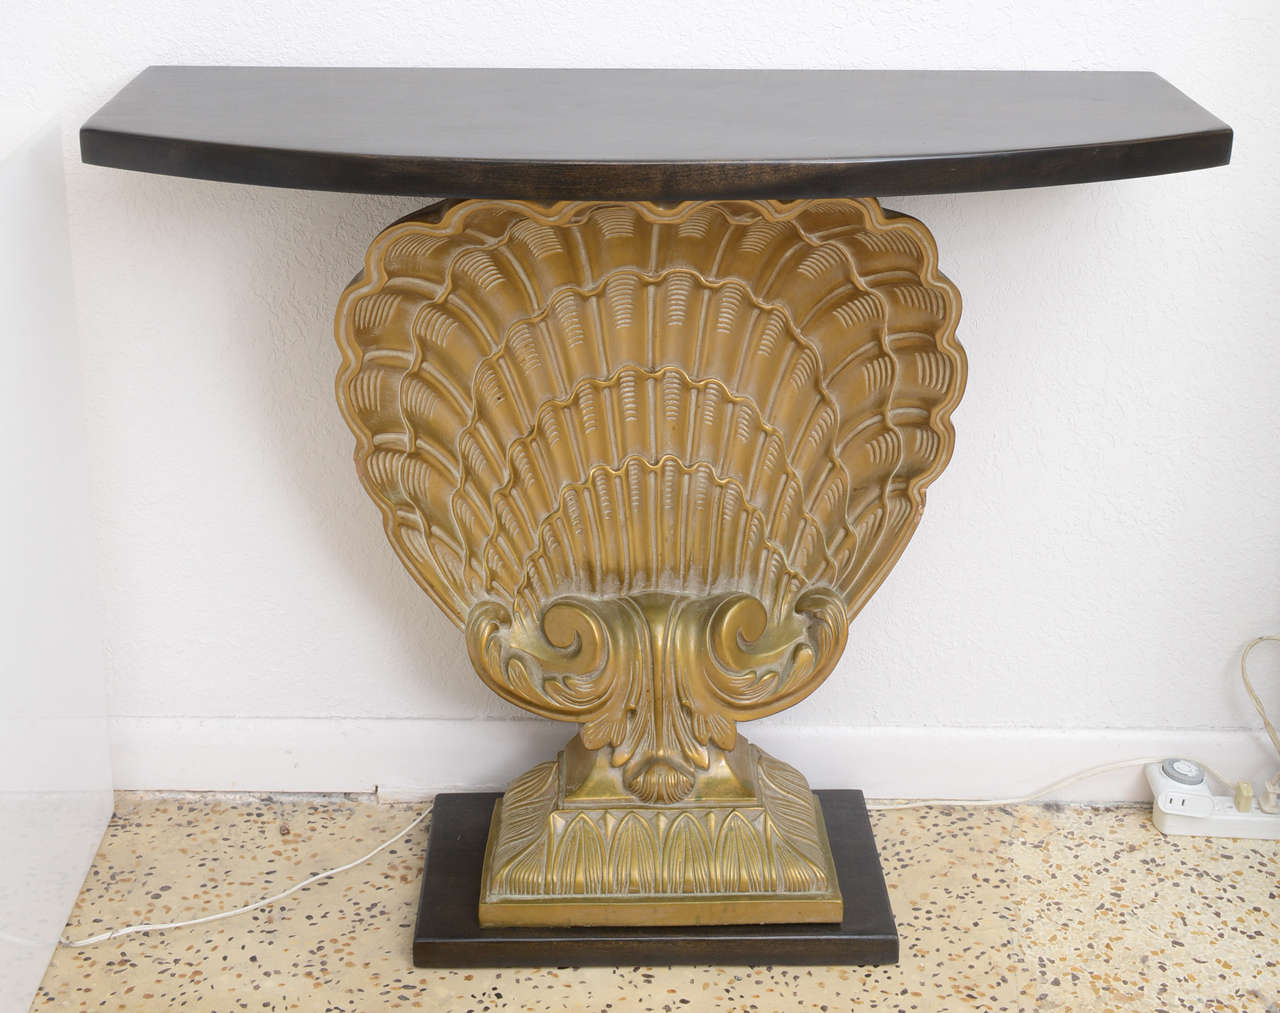 This beautiful Hollywood Regency style console table it by the iconic Grosfeld House furniture company. The piece is composed of a demilune shaped top and plinth base in mahogany wood that has been recently refinished. The scalloped shell is in